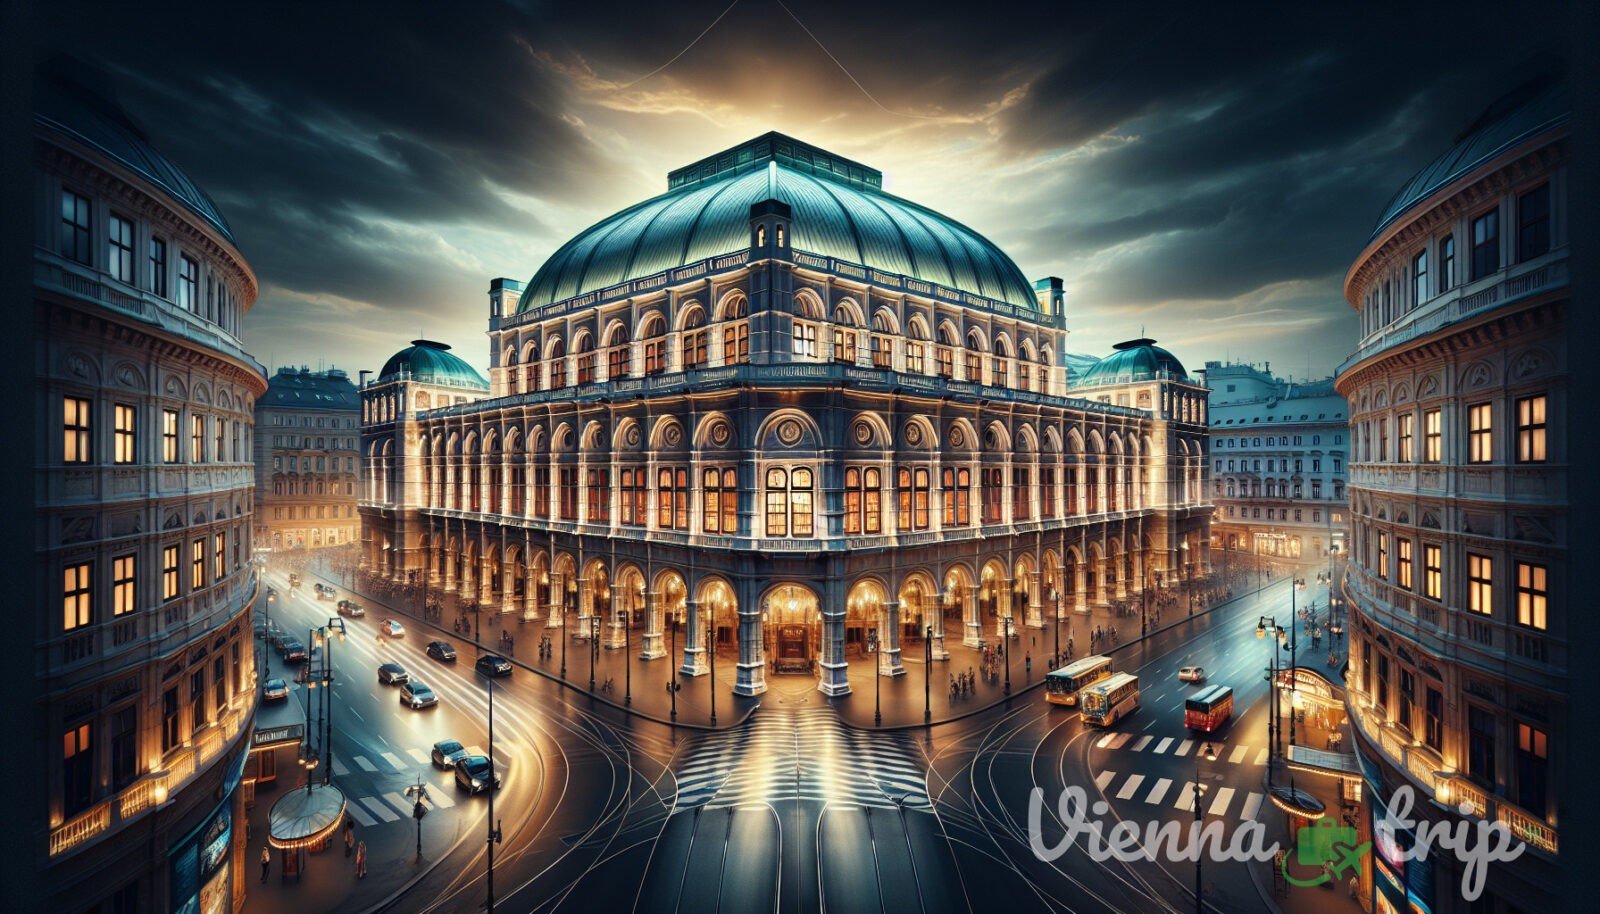 Illustration for section: The Vienna State Opera is a world-renowned opera house that showcases breathtaking performances of o - vienna symphonies